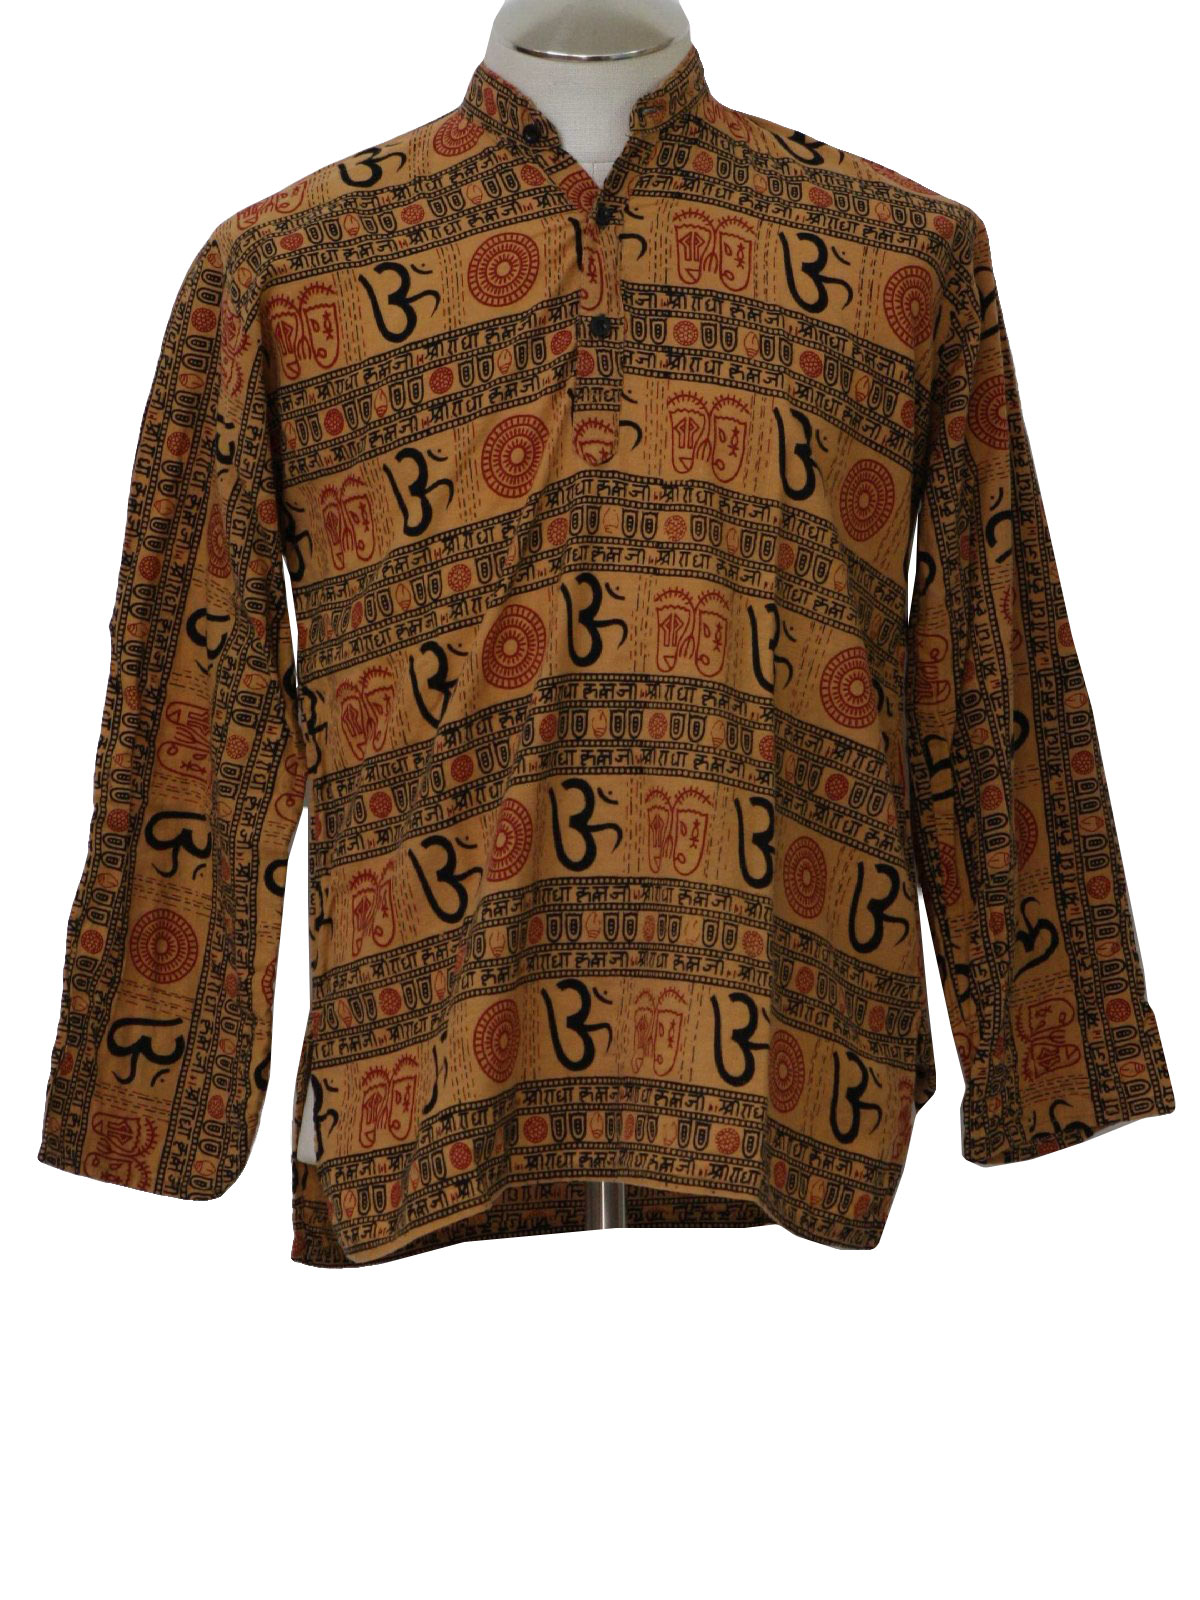 1970s Hippie Shirt: 70s style made more recently- Mens light brown with ...